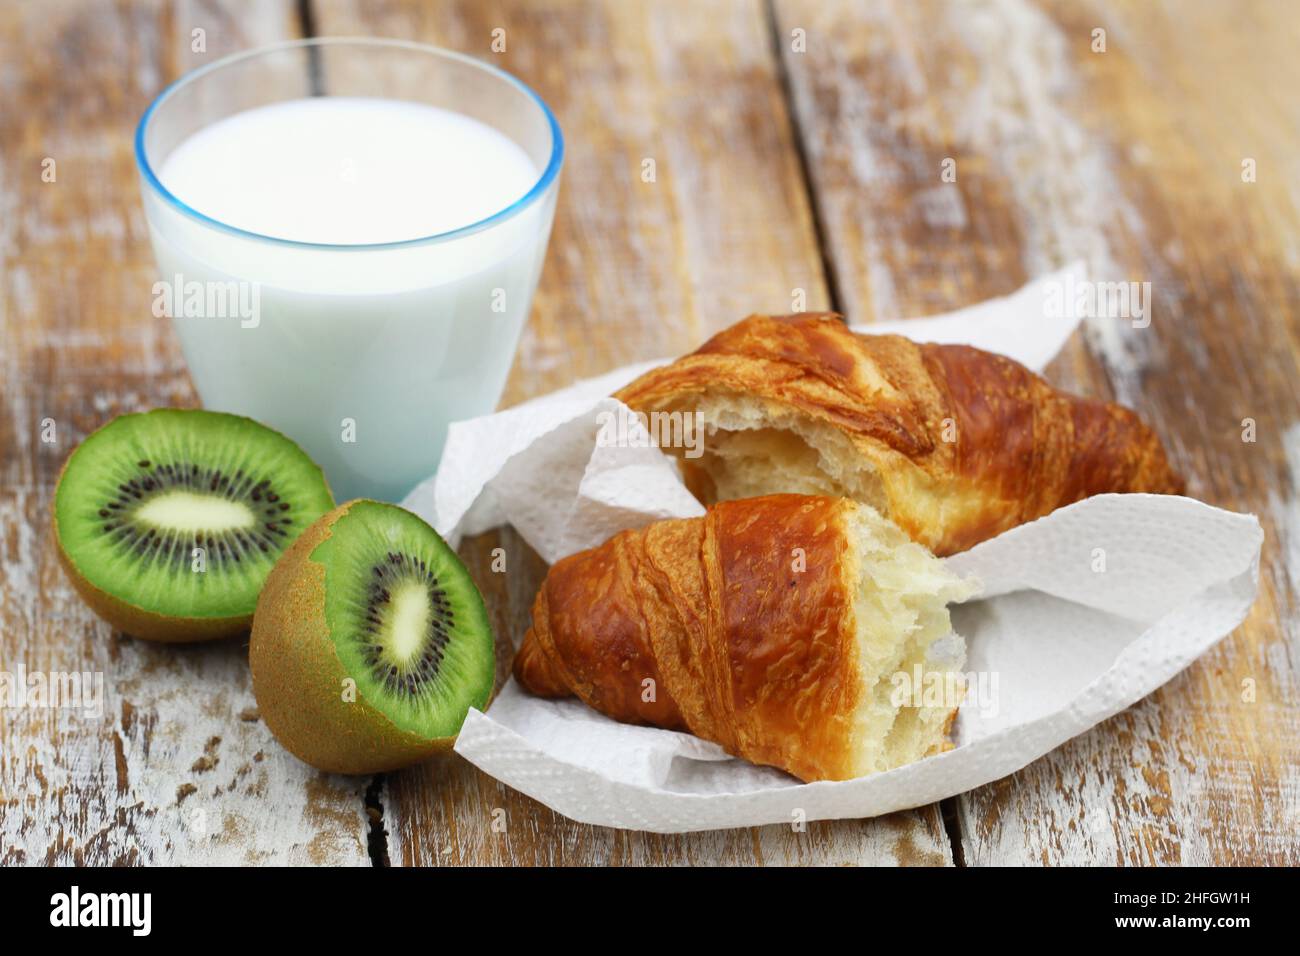 Continental breakfast: French croissant, kiwi fruit and glass of milk Stock Photo